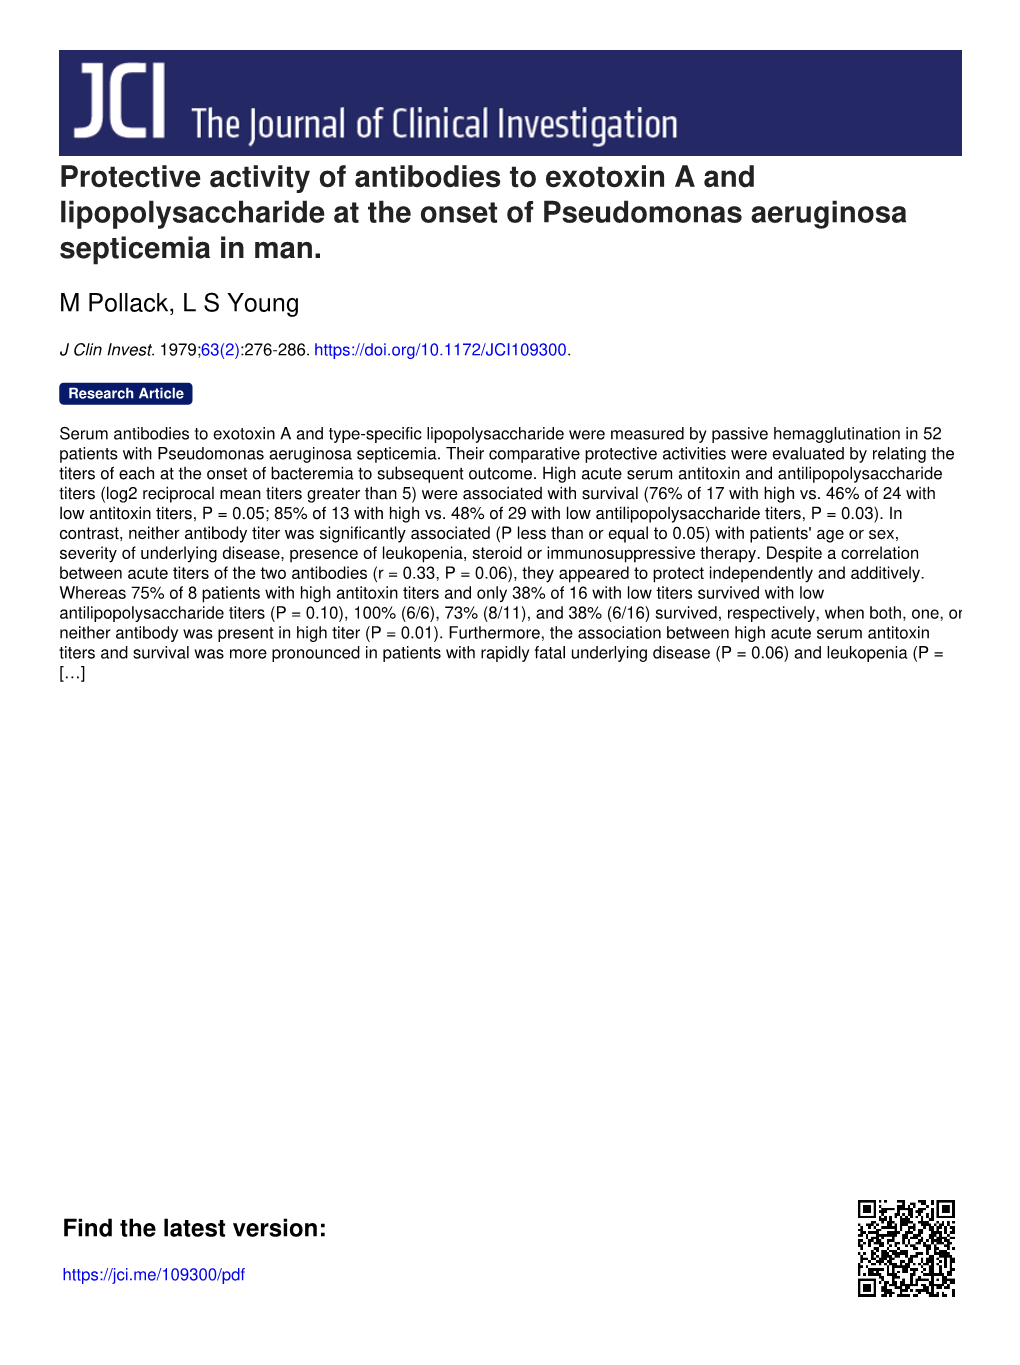 Protective Activity of Antibodies to Exotoxin a and Lipopolysaccharide at the Onset of Pseudomonas Aeruginosa Septicemia in Man